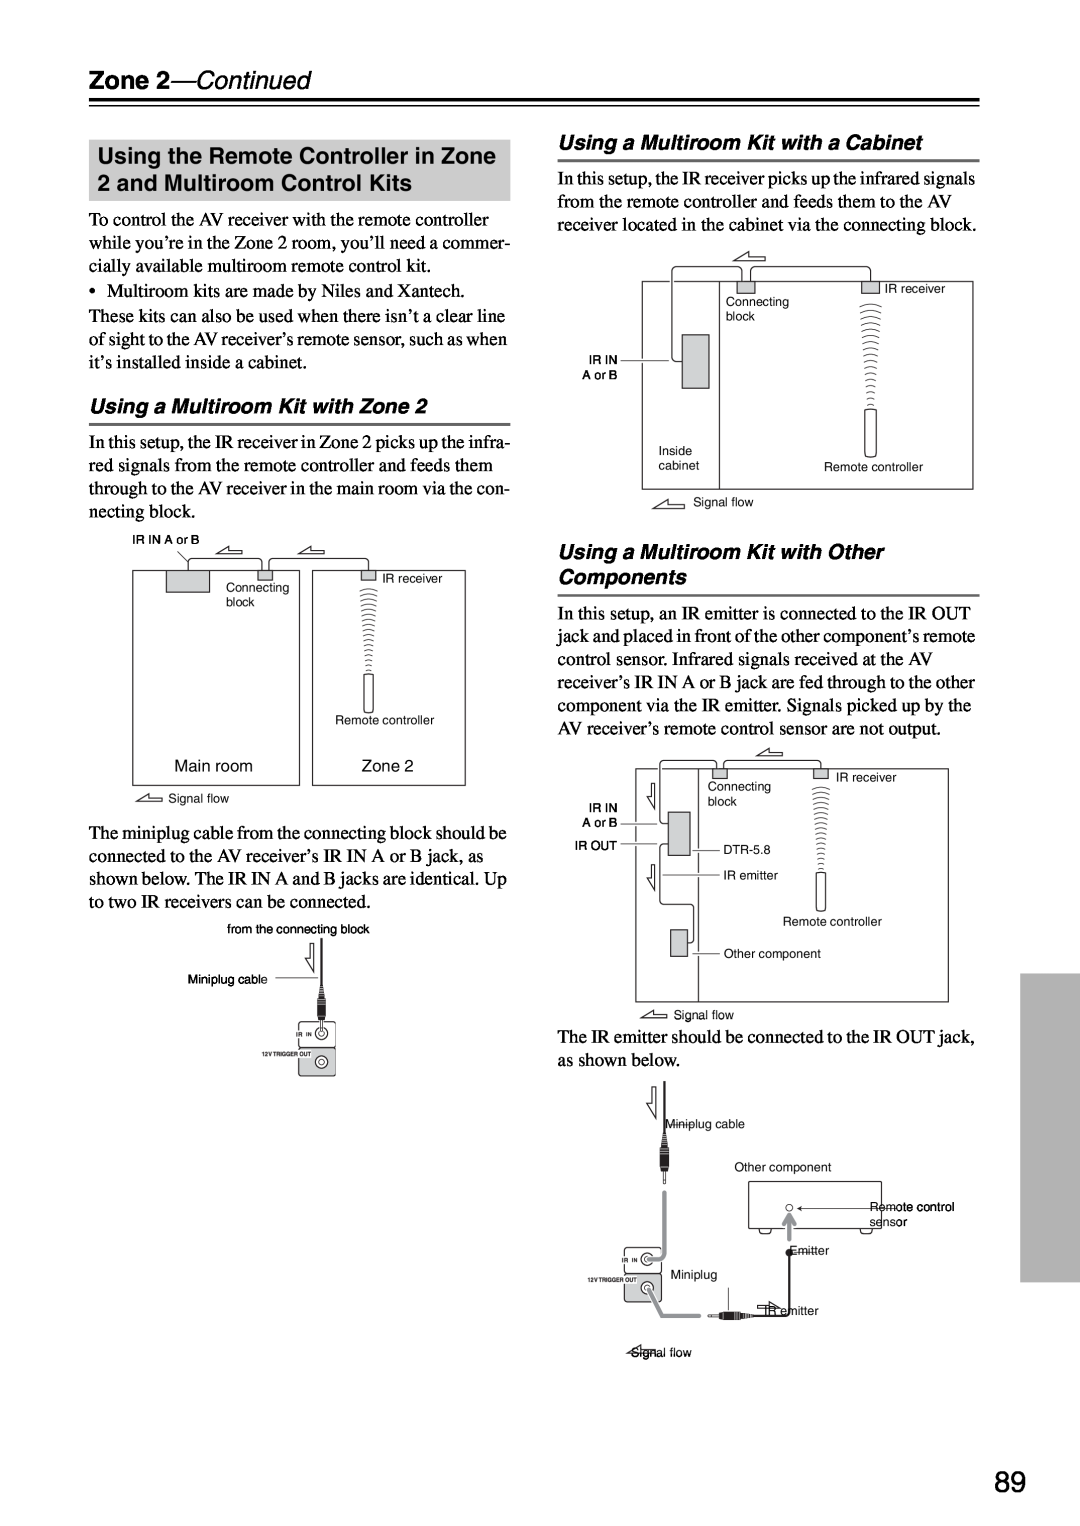 Integra DTR-5.8 instruction manual Using a Multiroom Kit with a Cabinet, Using a Multiroom Kit with Zone, Zone 2—Continued 